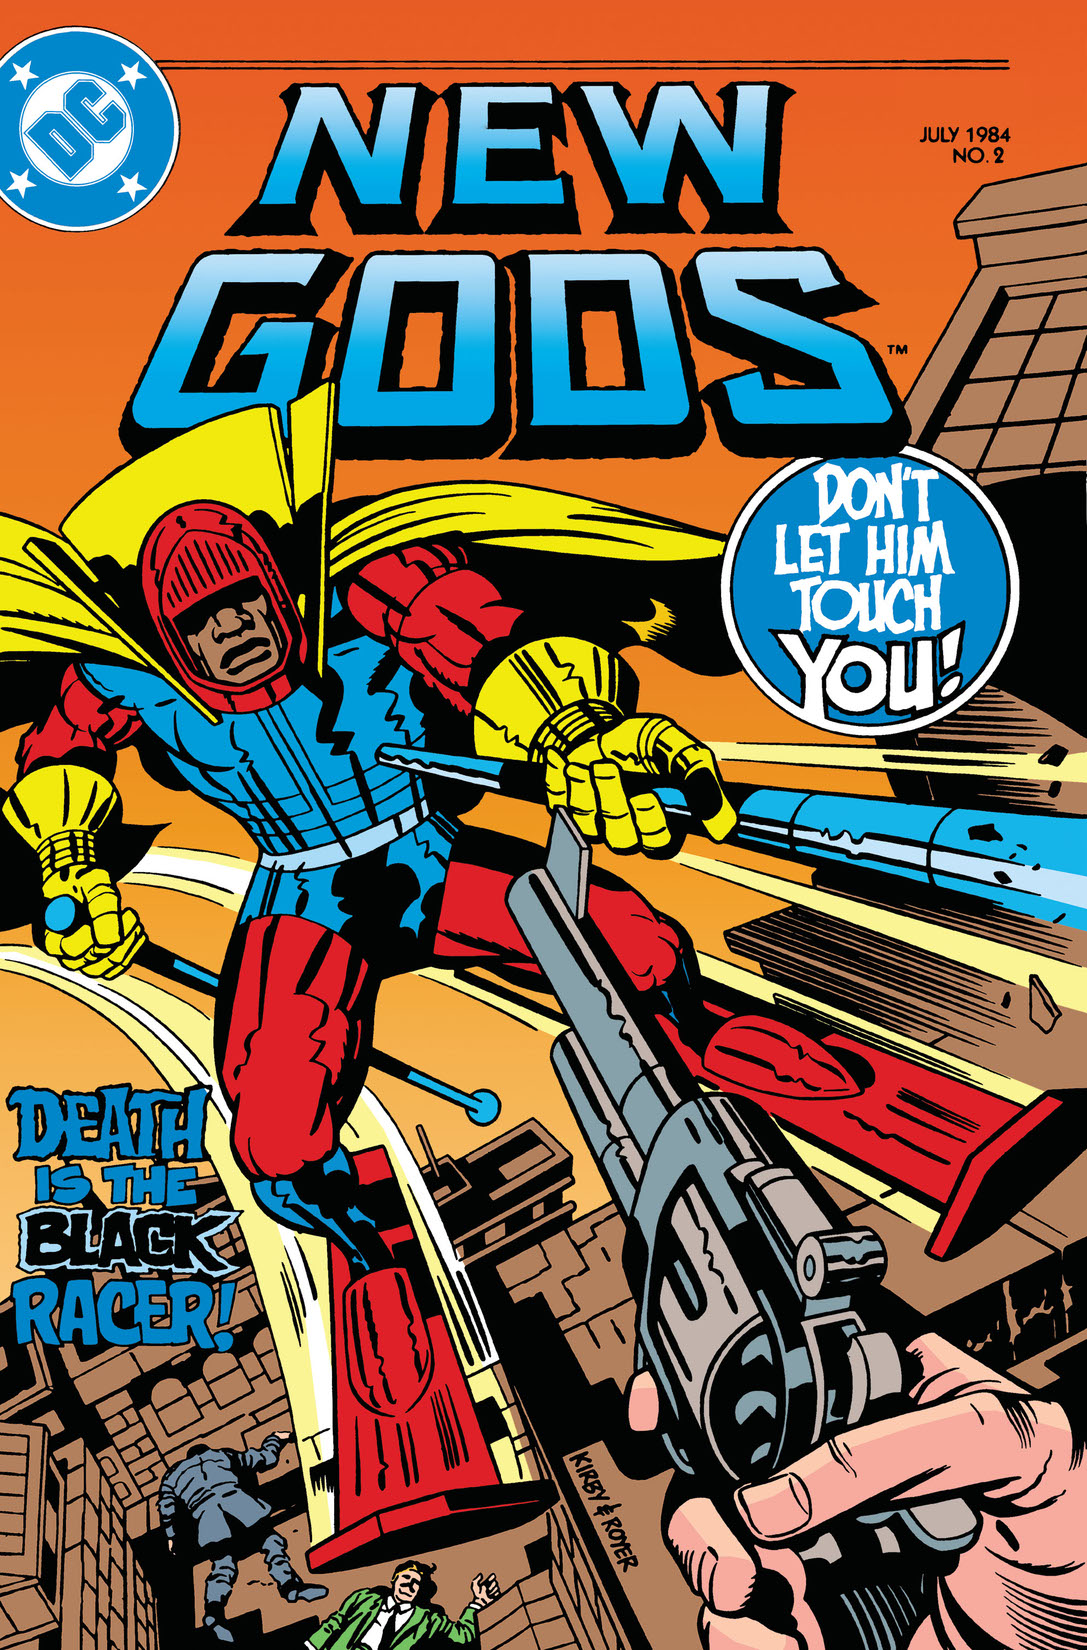 New Gods (1984-) #2 preview images